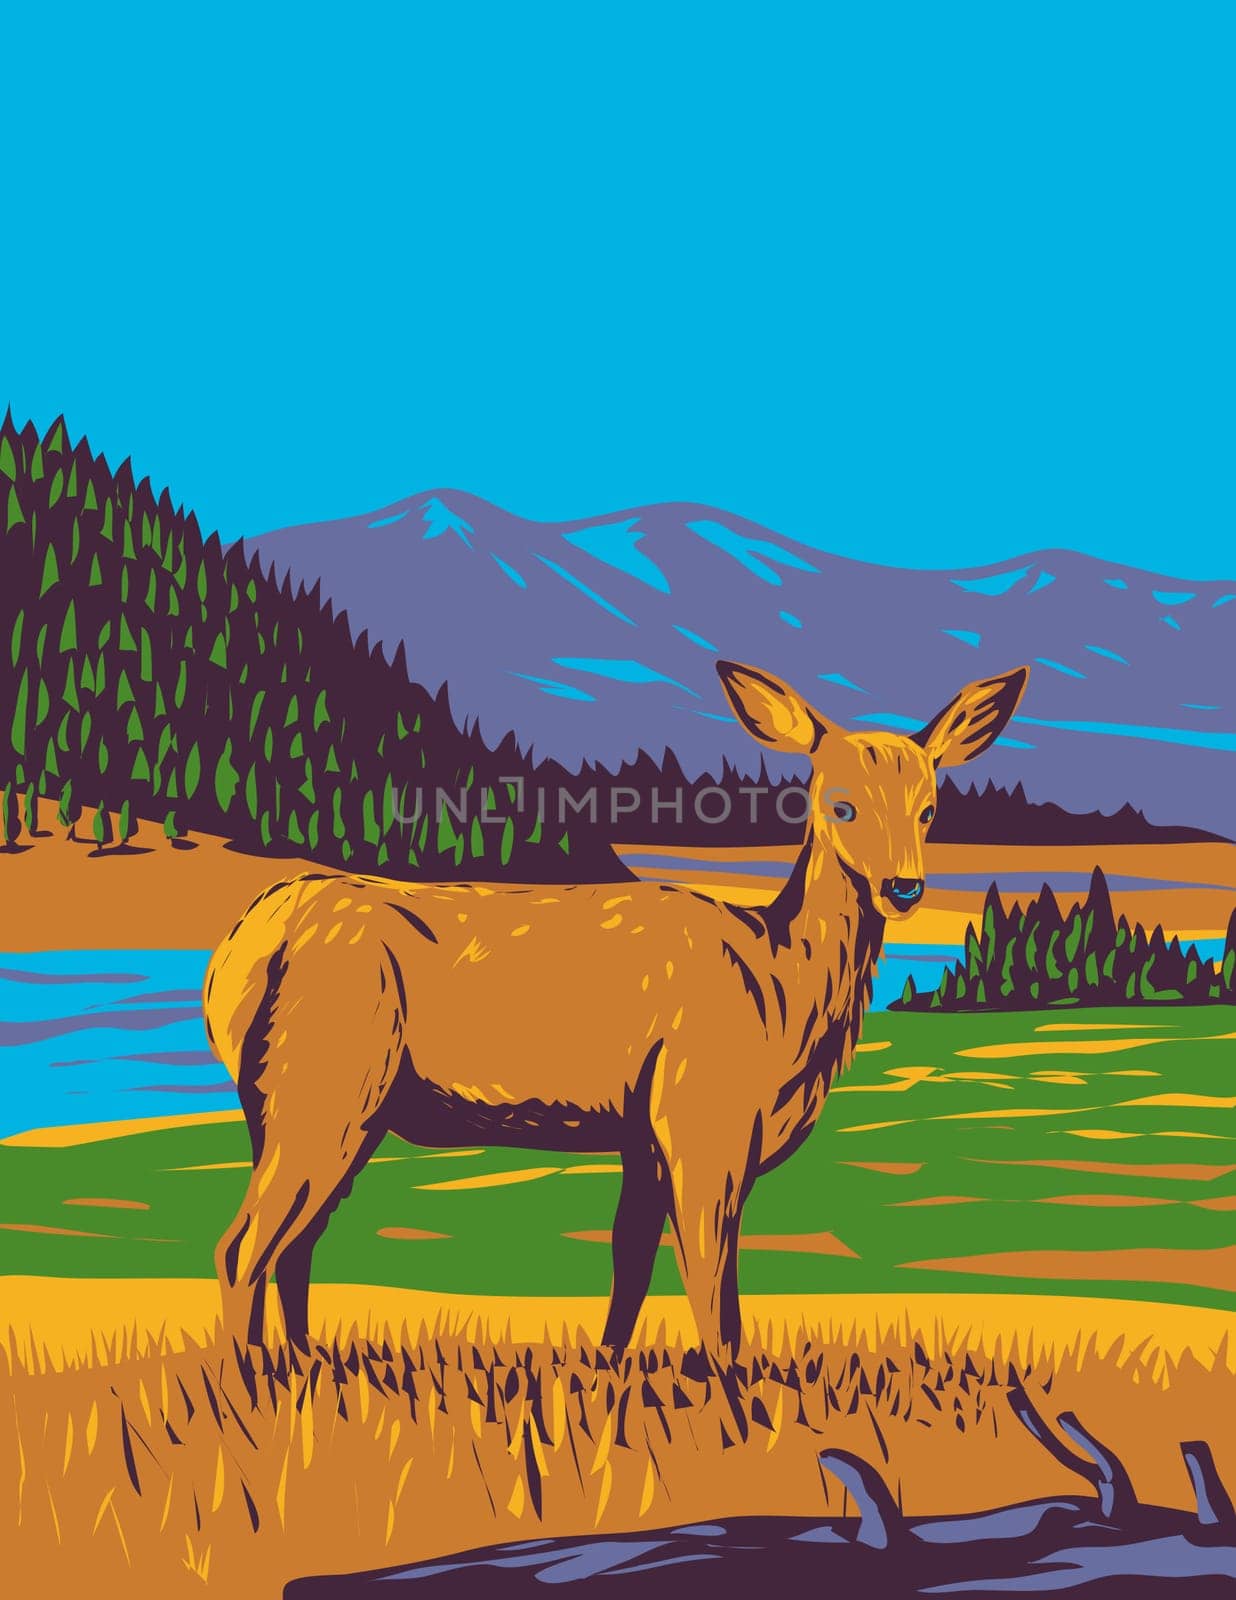 WPA poster art of a mule deer Odocoileus hemionus in Yellowstone National Park, Wyoming USA done in works project administration or federal art project style.